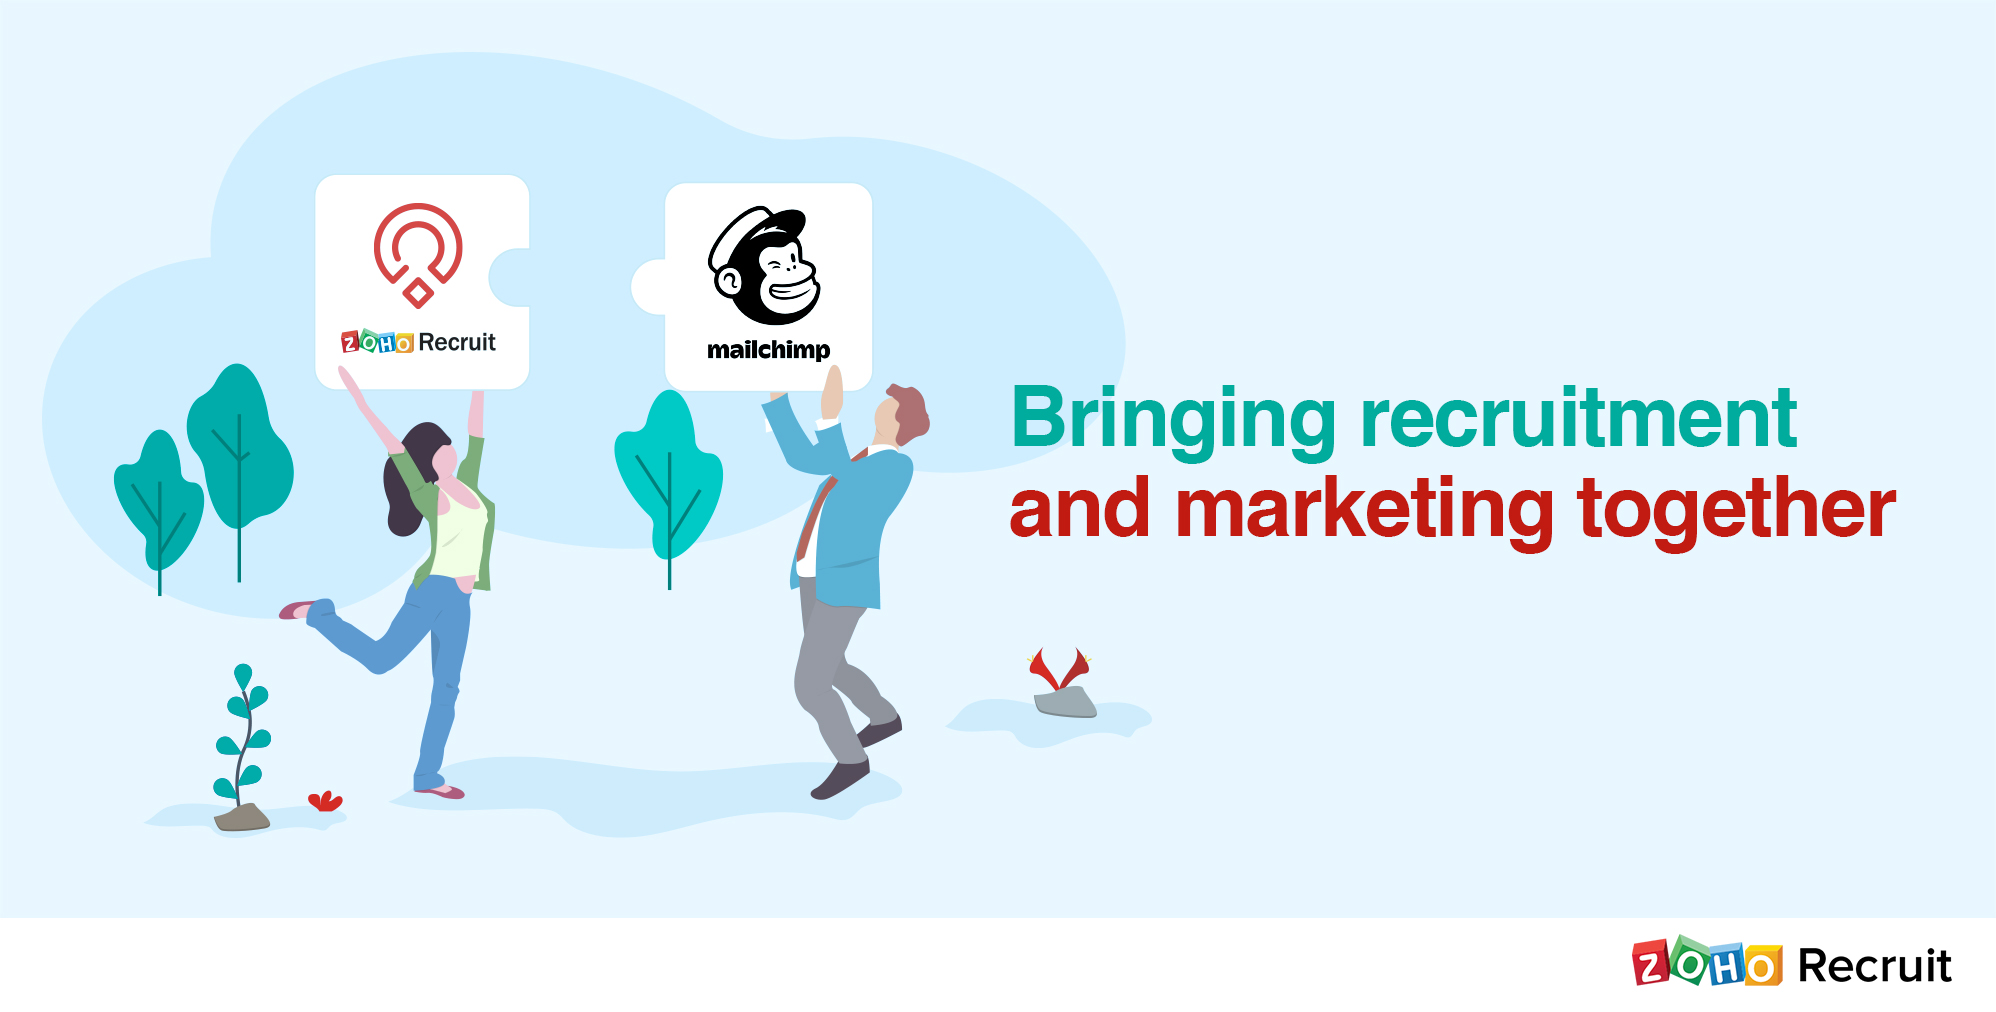 We bring to you the Zoho Recruit - MailChimp integration.